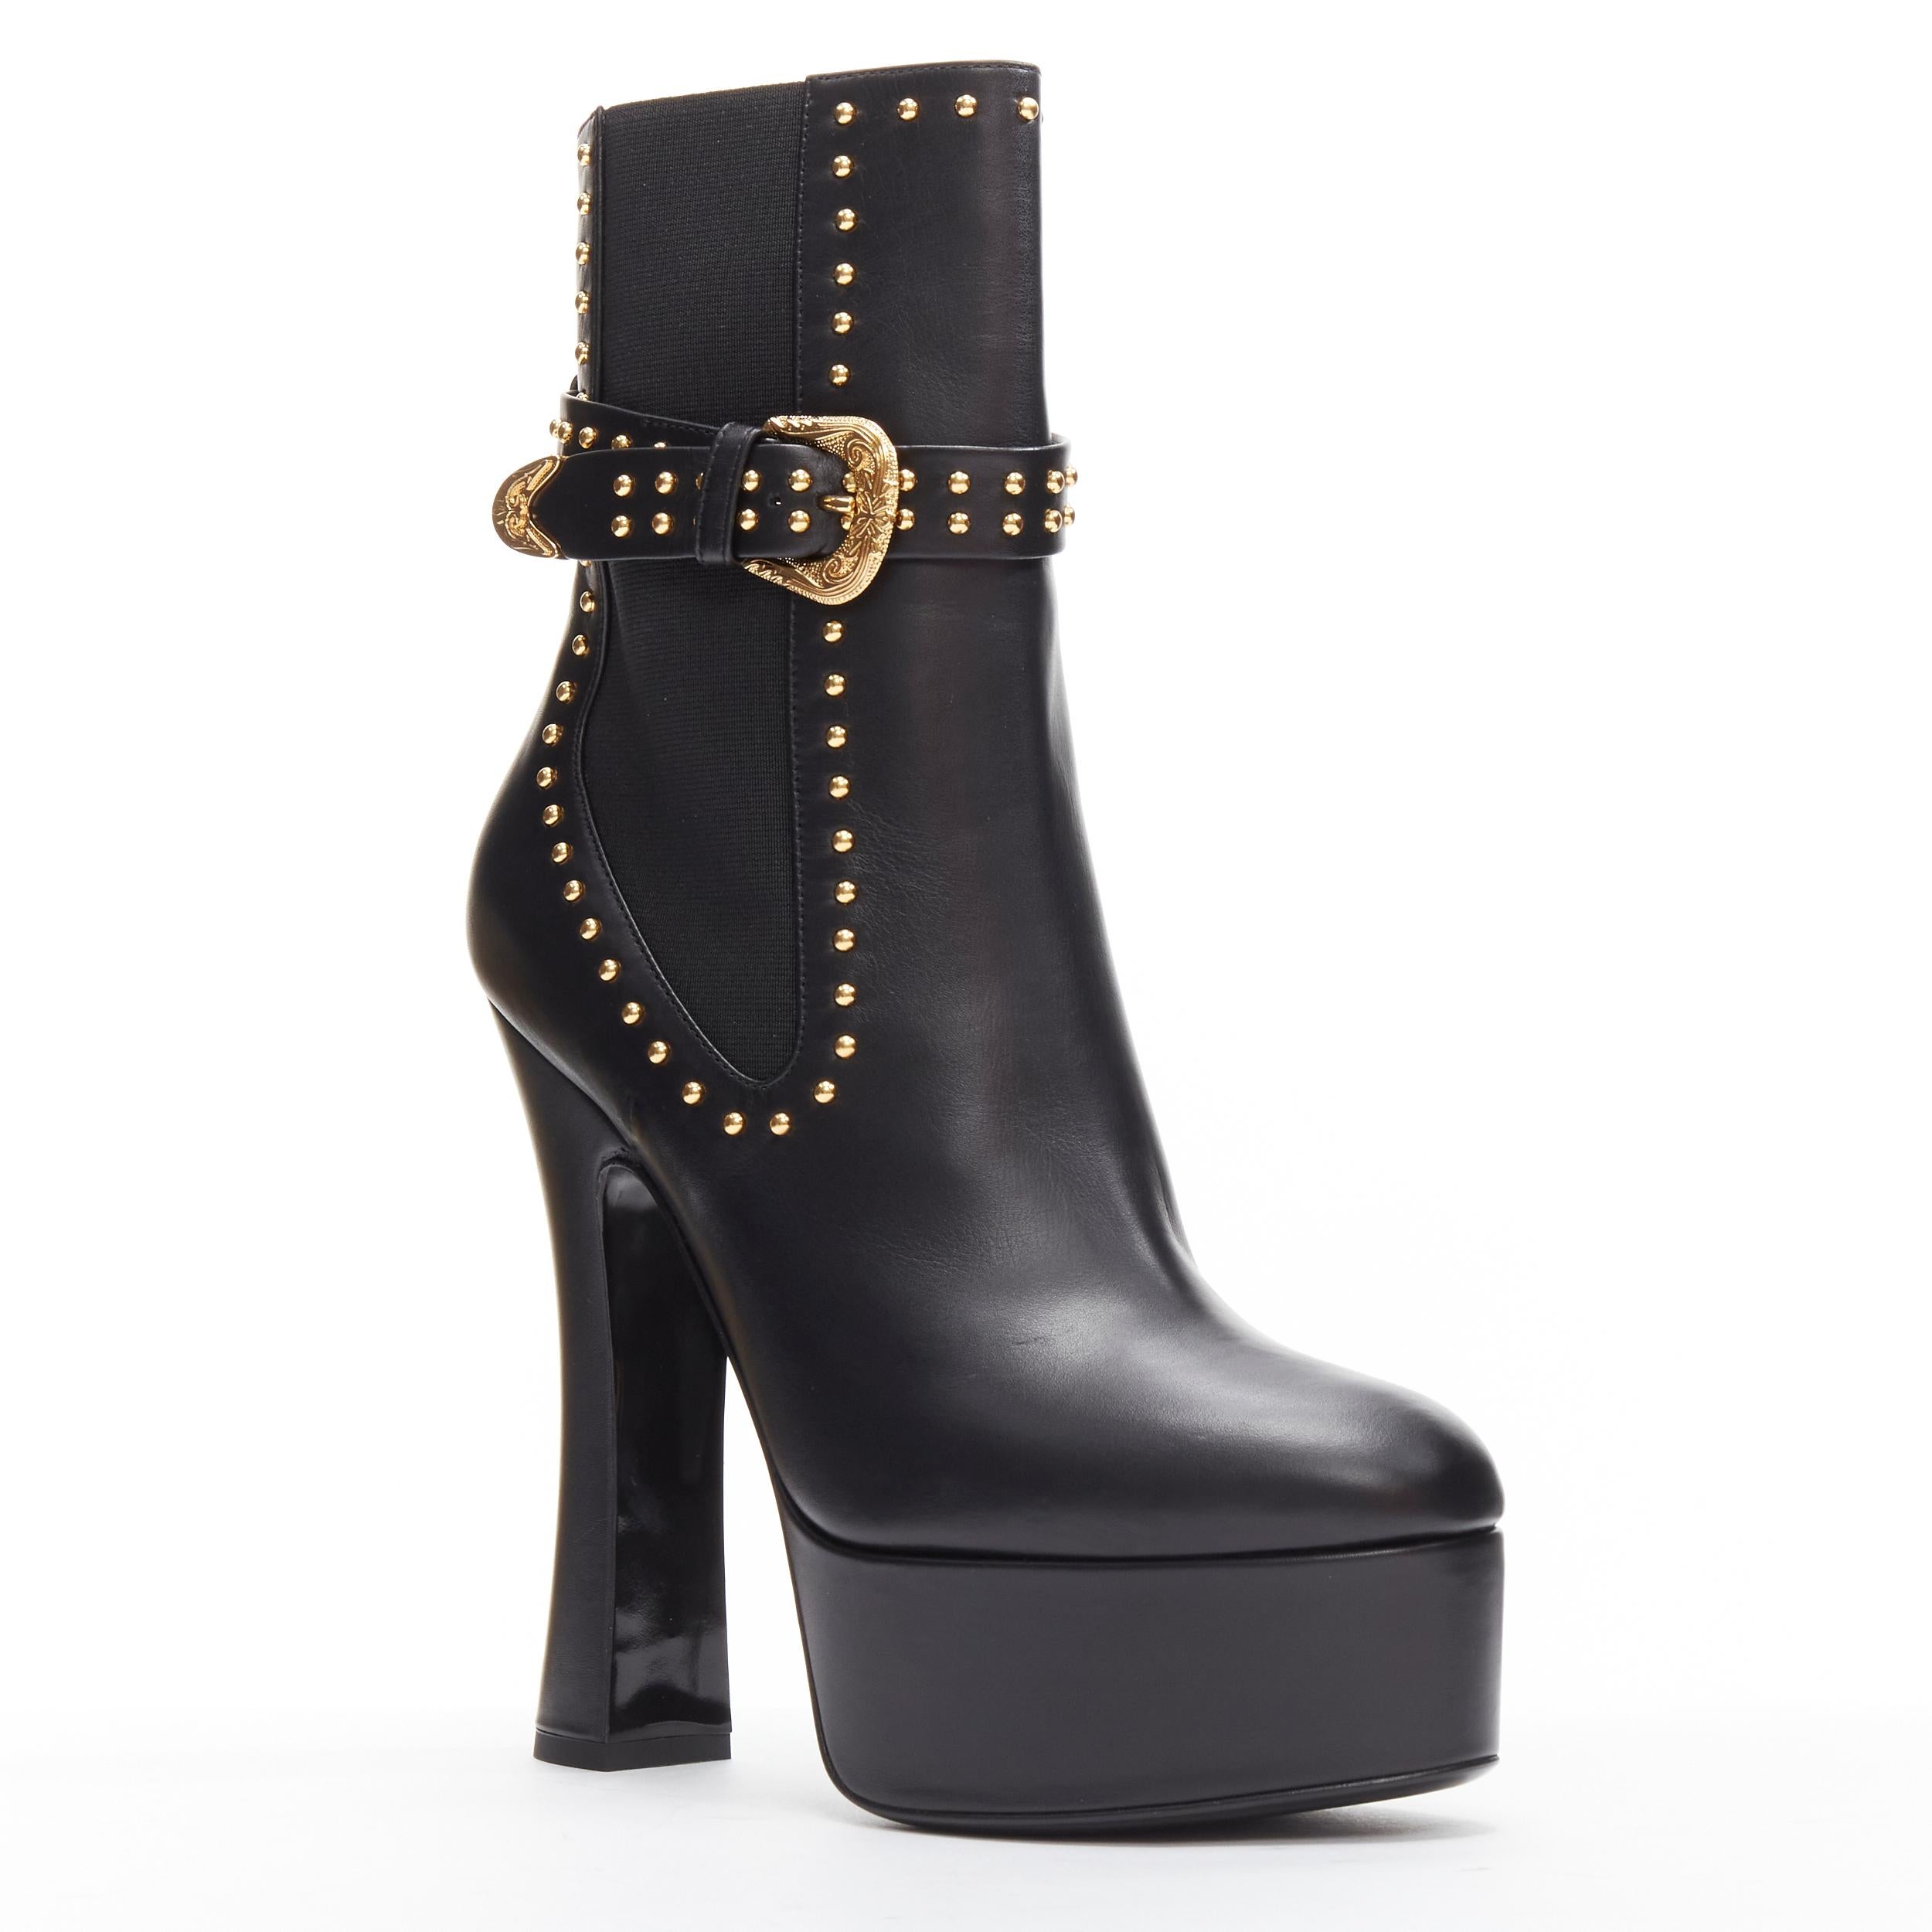 new VERSACE gold studded western buckle black leather platform boots EU40.5
Reference: TGAS/C01796
Brand: Versace
Designer: Donatella Versace
Model: DST203T DVT4X D41OH
Material: Leather
Color: Black
Pattern: Solid
Estimated Retail Price: USD